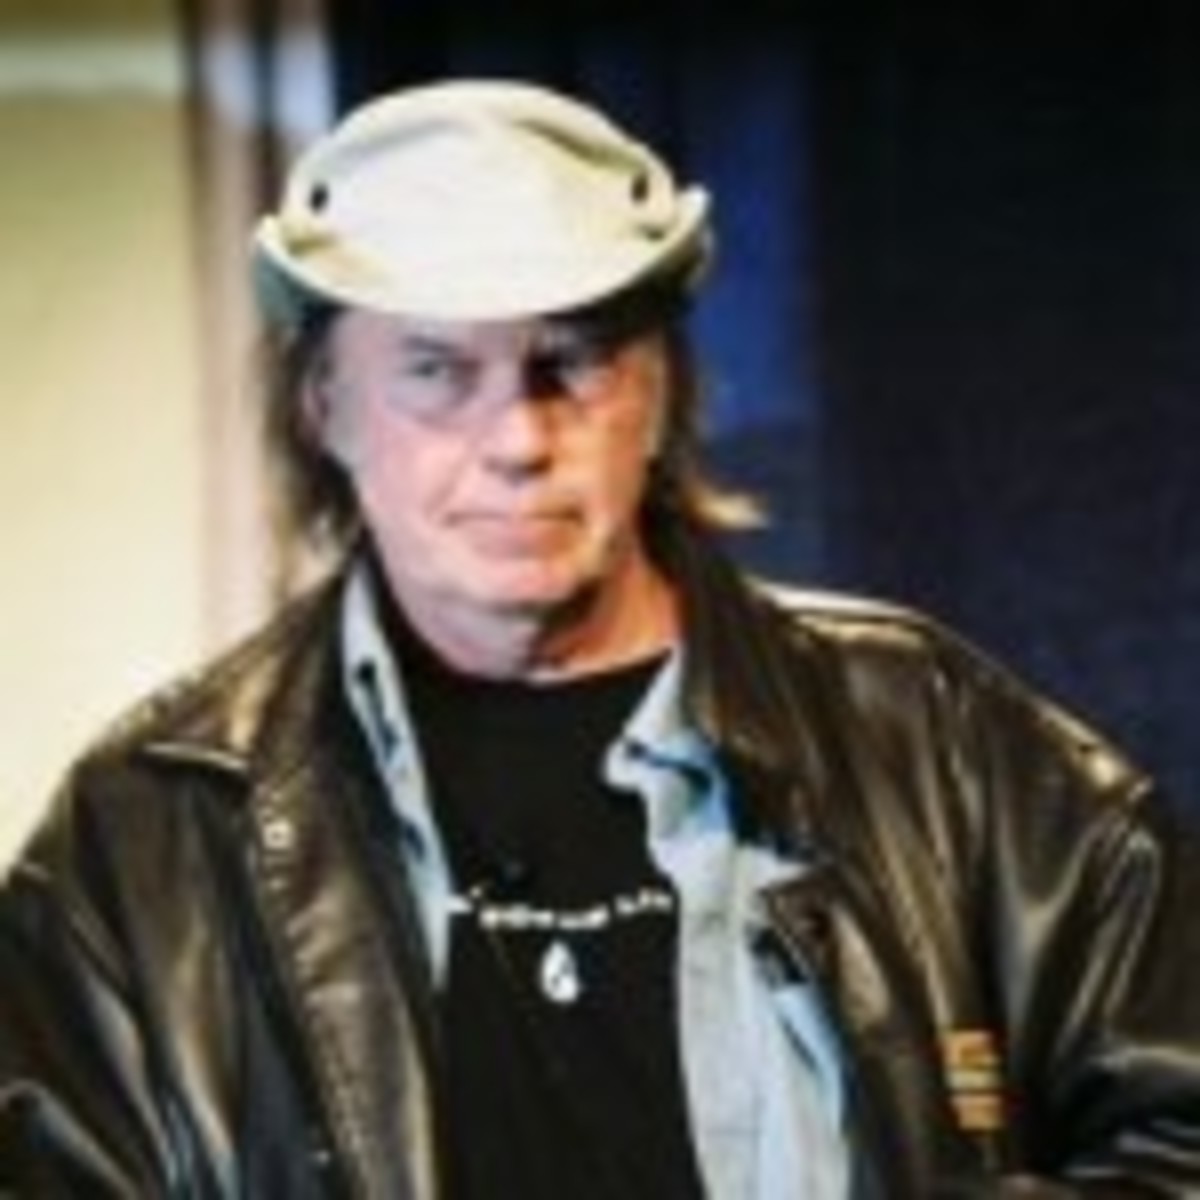 Neil Young at SXSW 2006 (photo by Chris M. Junior)